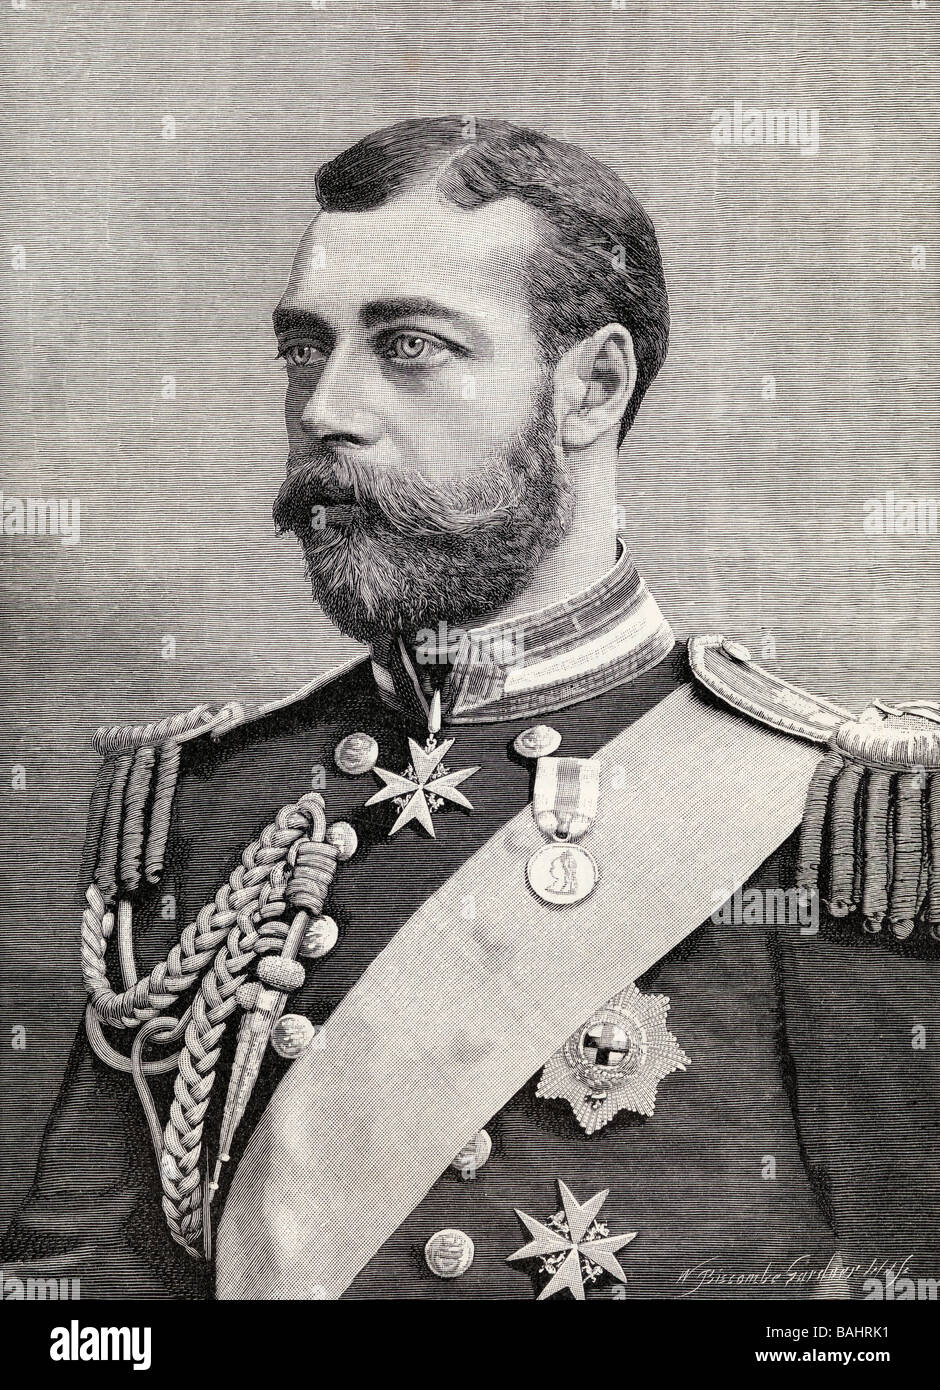 Prince George of Wales, later King George V. George Frederick Ernest Albert, 1865 - 1936. Stock Photo